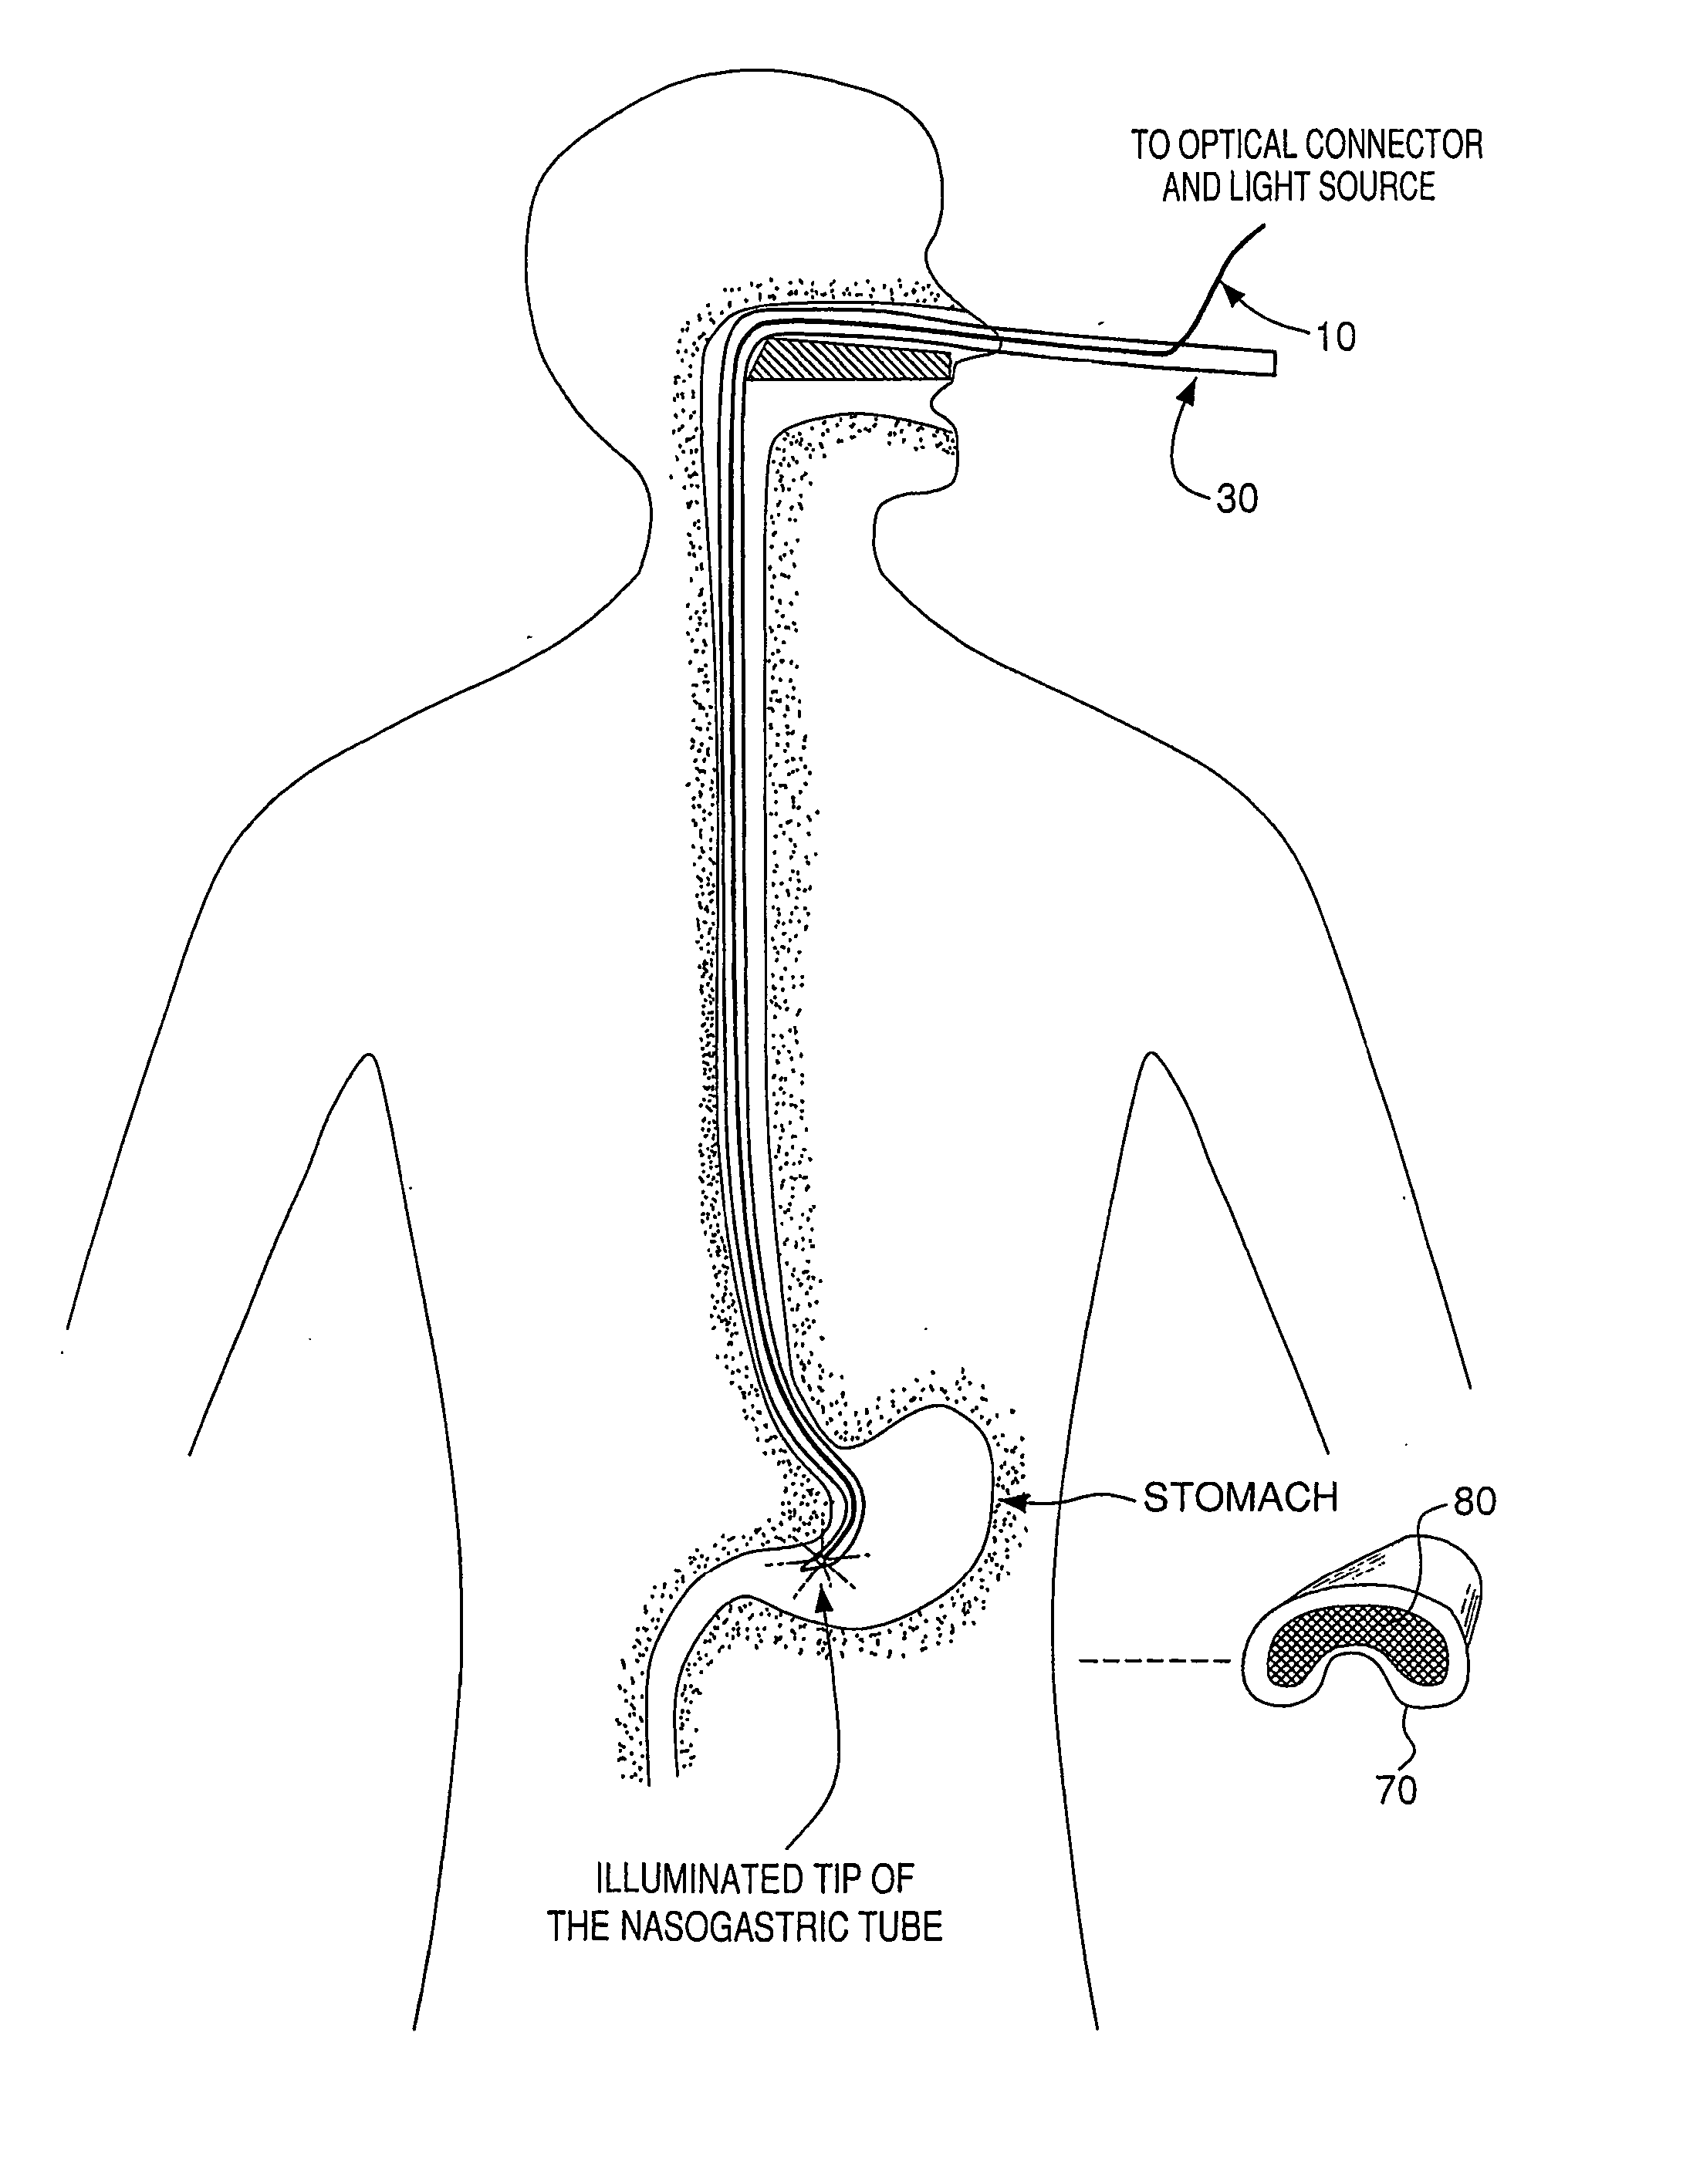 Optical guidance system for invasive catheter placement